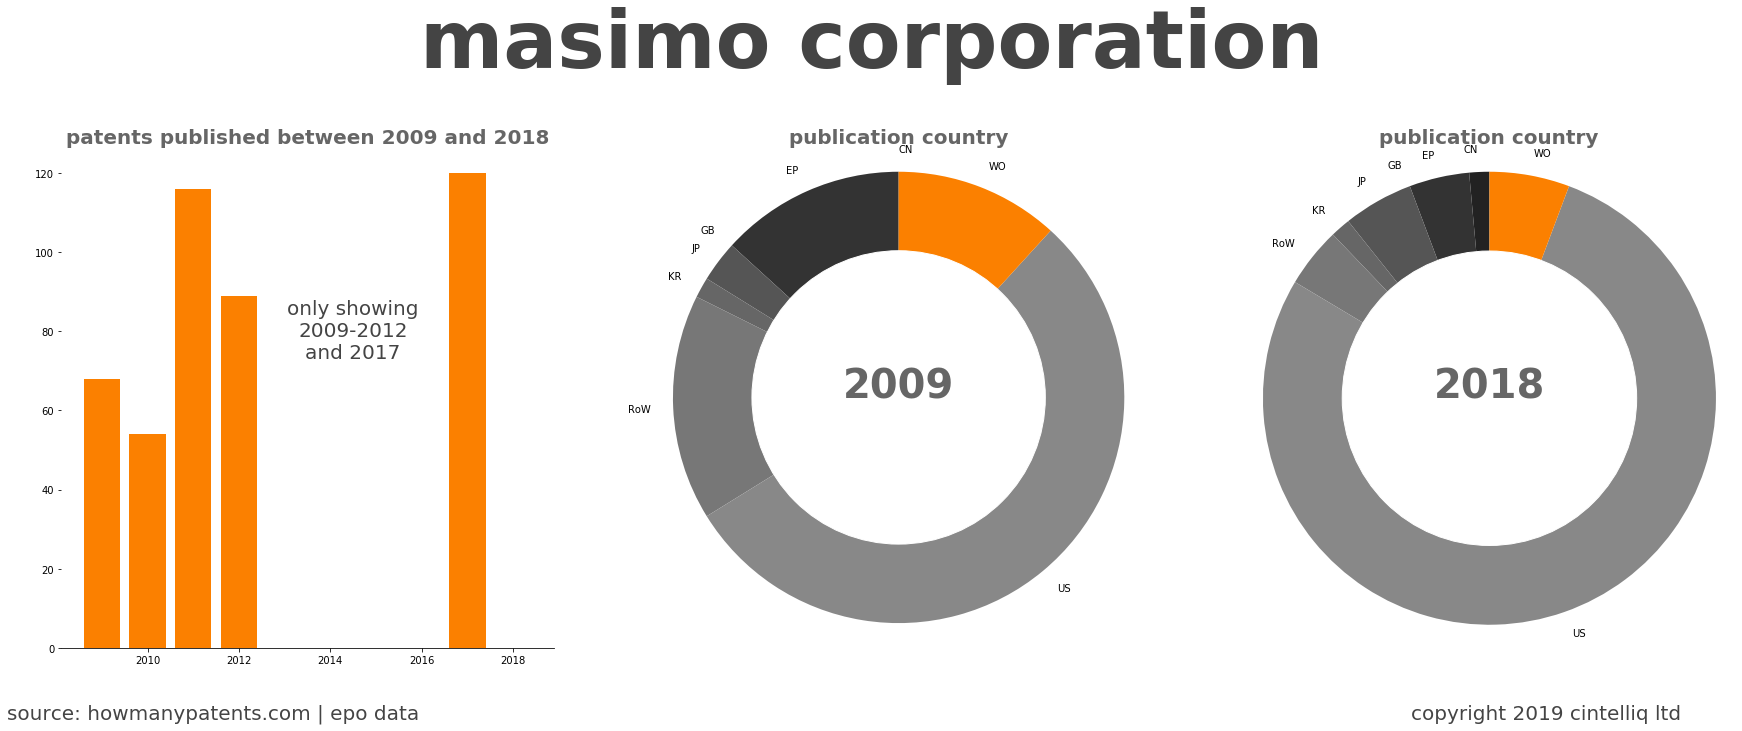 summary of patents for Masimo Corporation